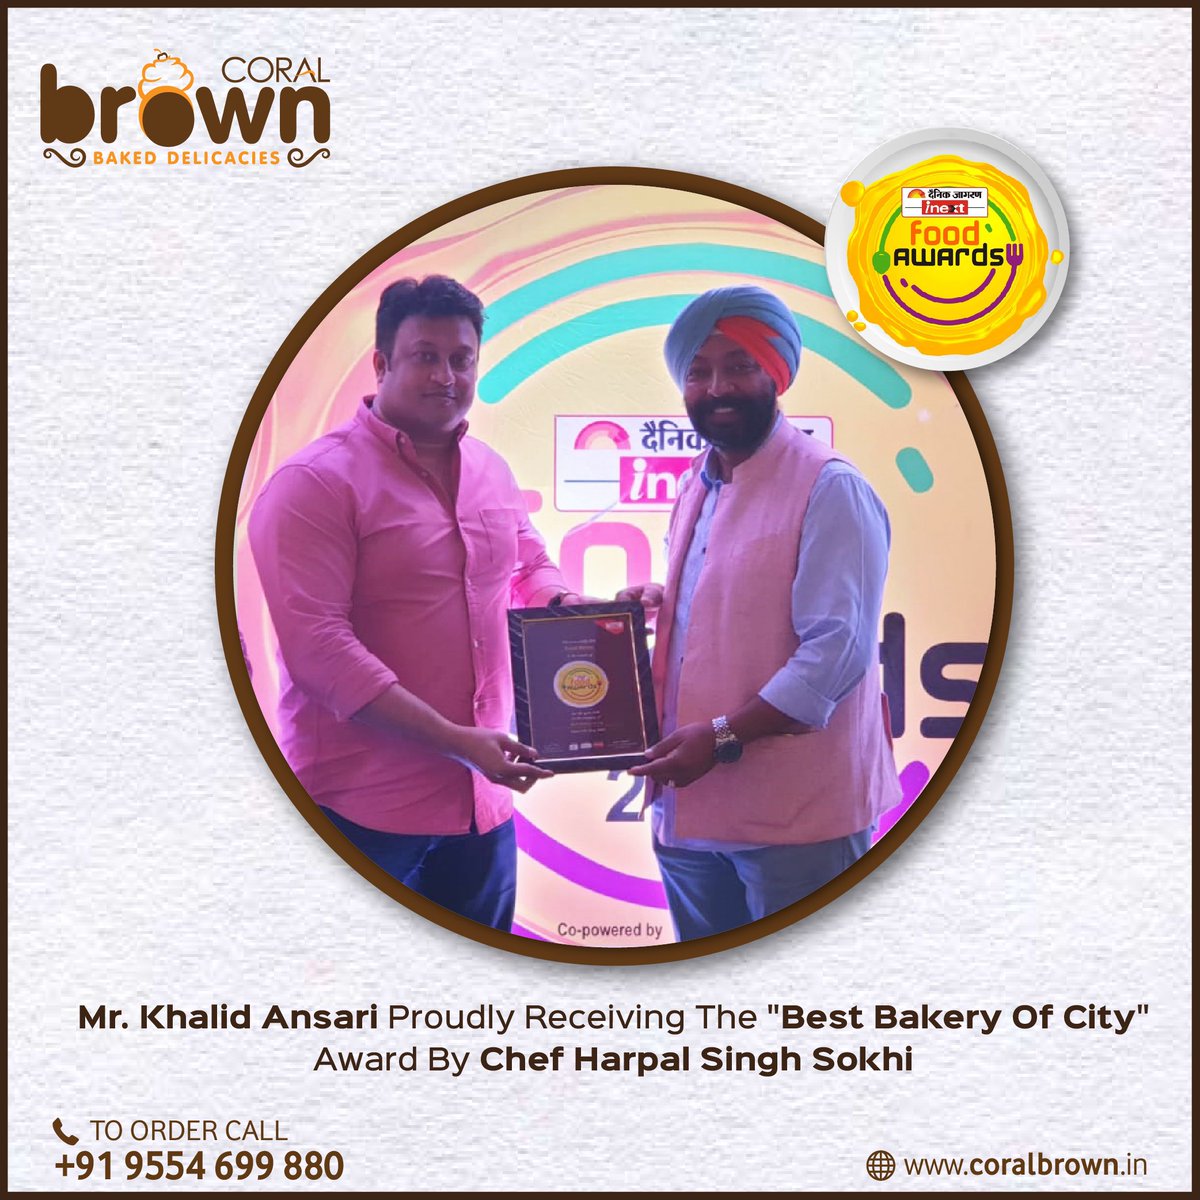 Mr. Khalid Ansari proudly receiving the 'Best Bakery of City' Award for Coral Brown by Chef Harpal Singh Sokhi in the Dainik Jagran i-next Food Awards 2019. 

To Order: +91 9554699880 

#Zomato: bit.ly/2Lrm9se 
#Swiggy: bit.ly/2LrwyDU 

#CoralBrown #coralgroup